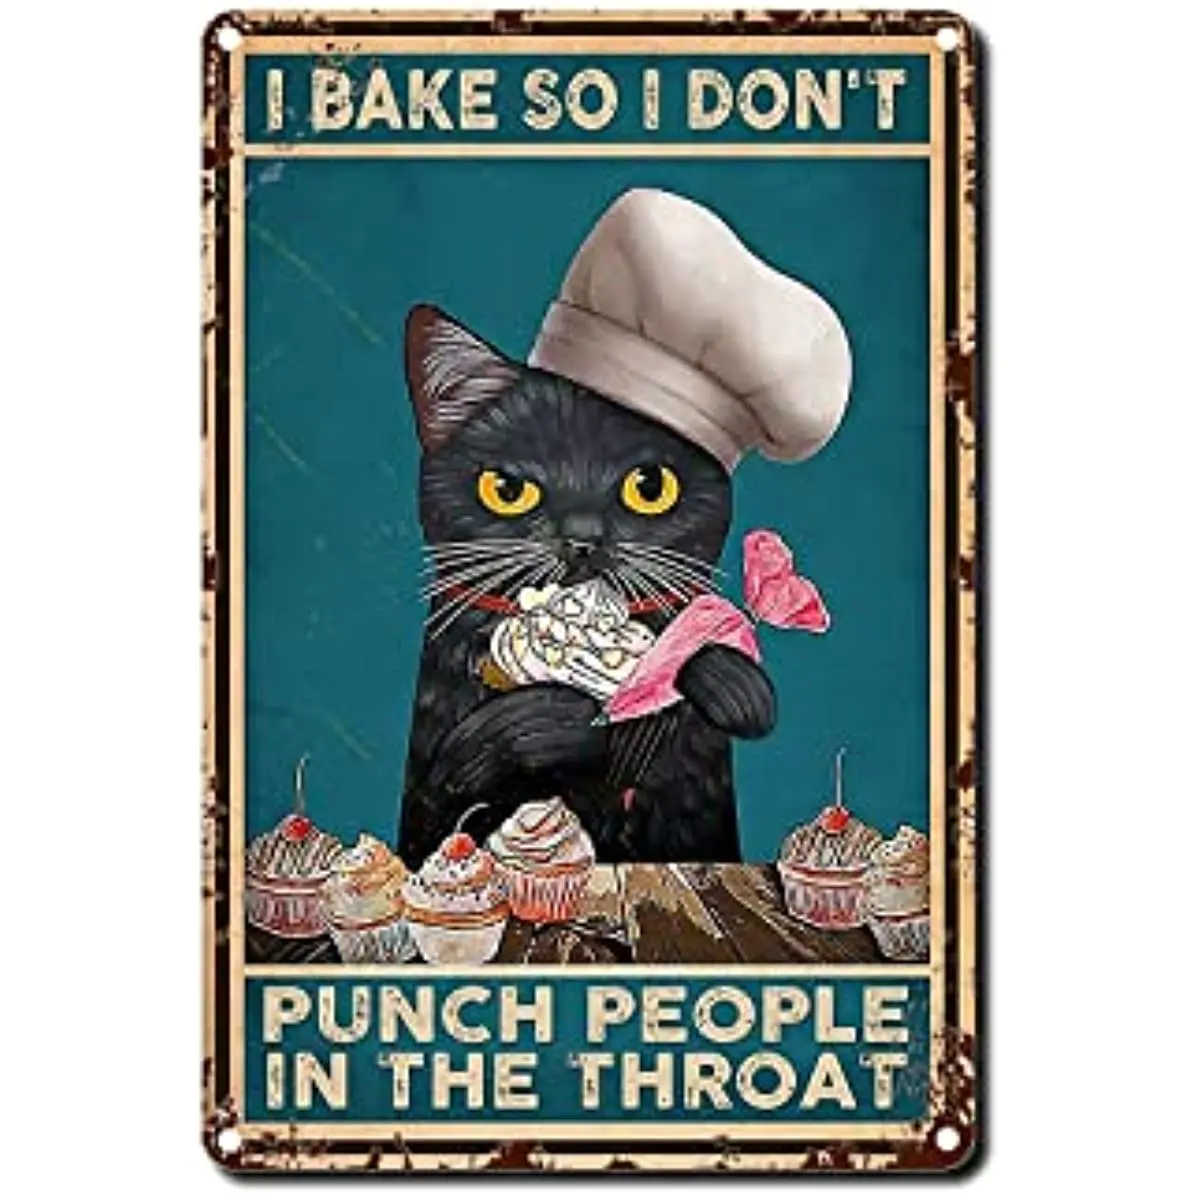 

Tin Sign Funny I Bake So I Don't Punch People In The Throat Vintage Cat I Bake So I Don't Punch People In The Throat Poster